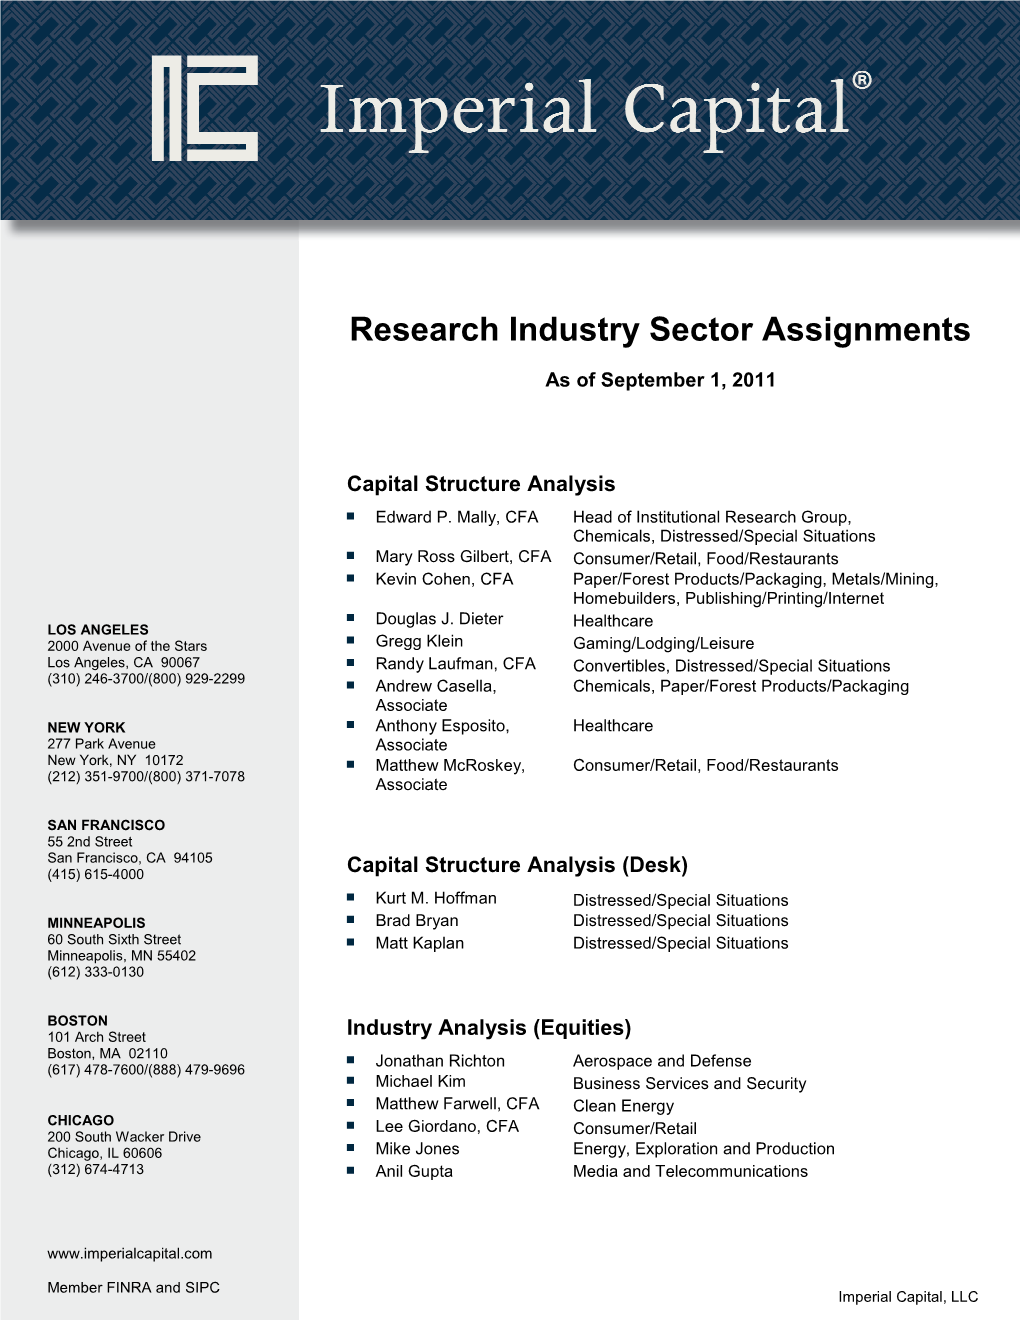 Research Industry Sector Assignments